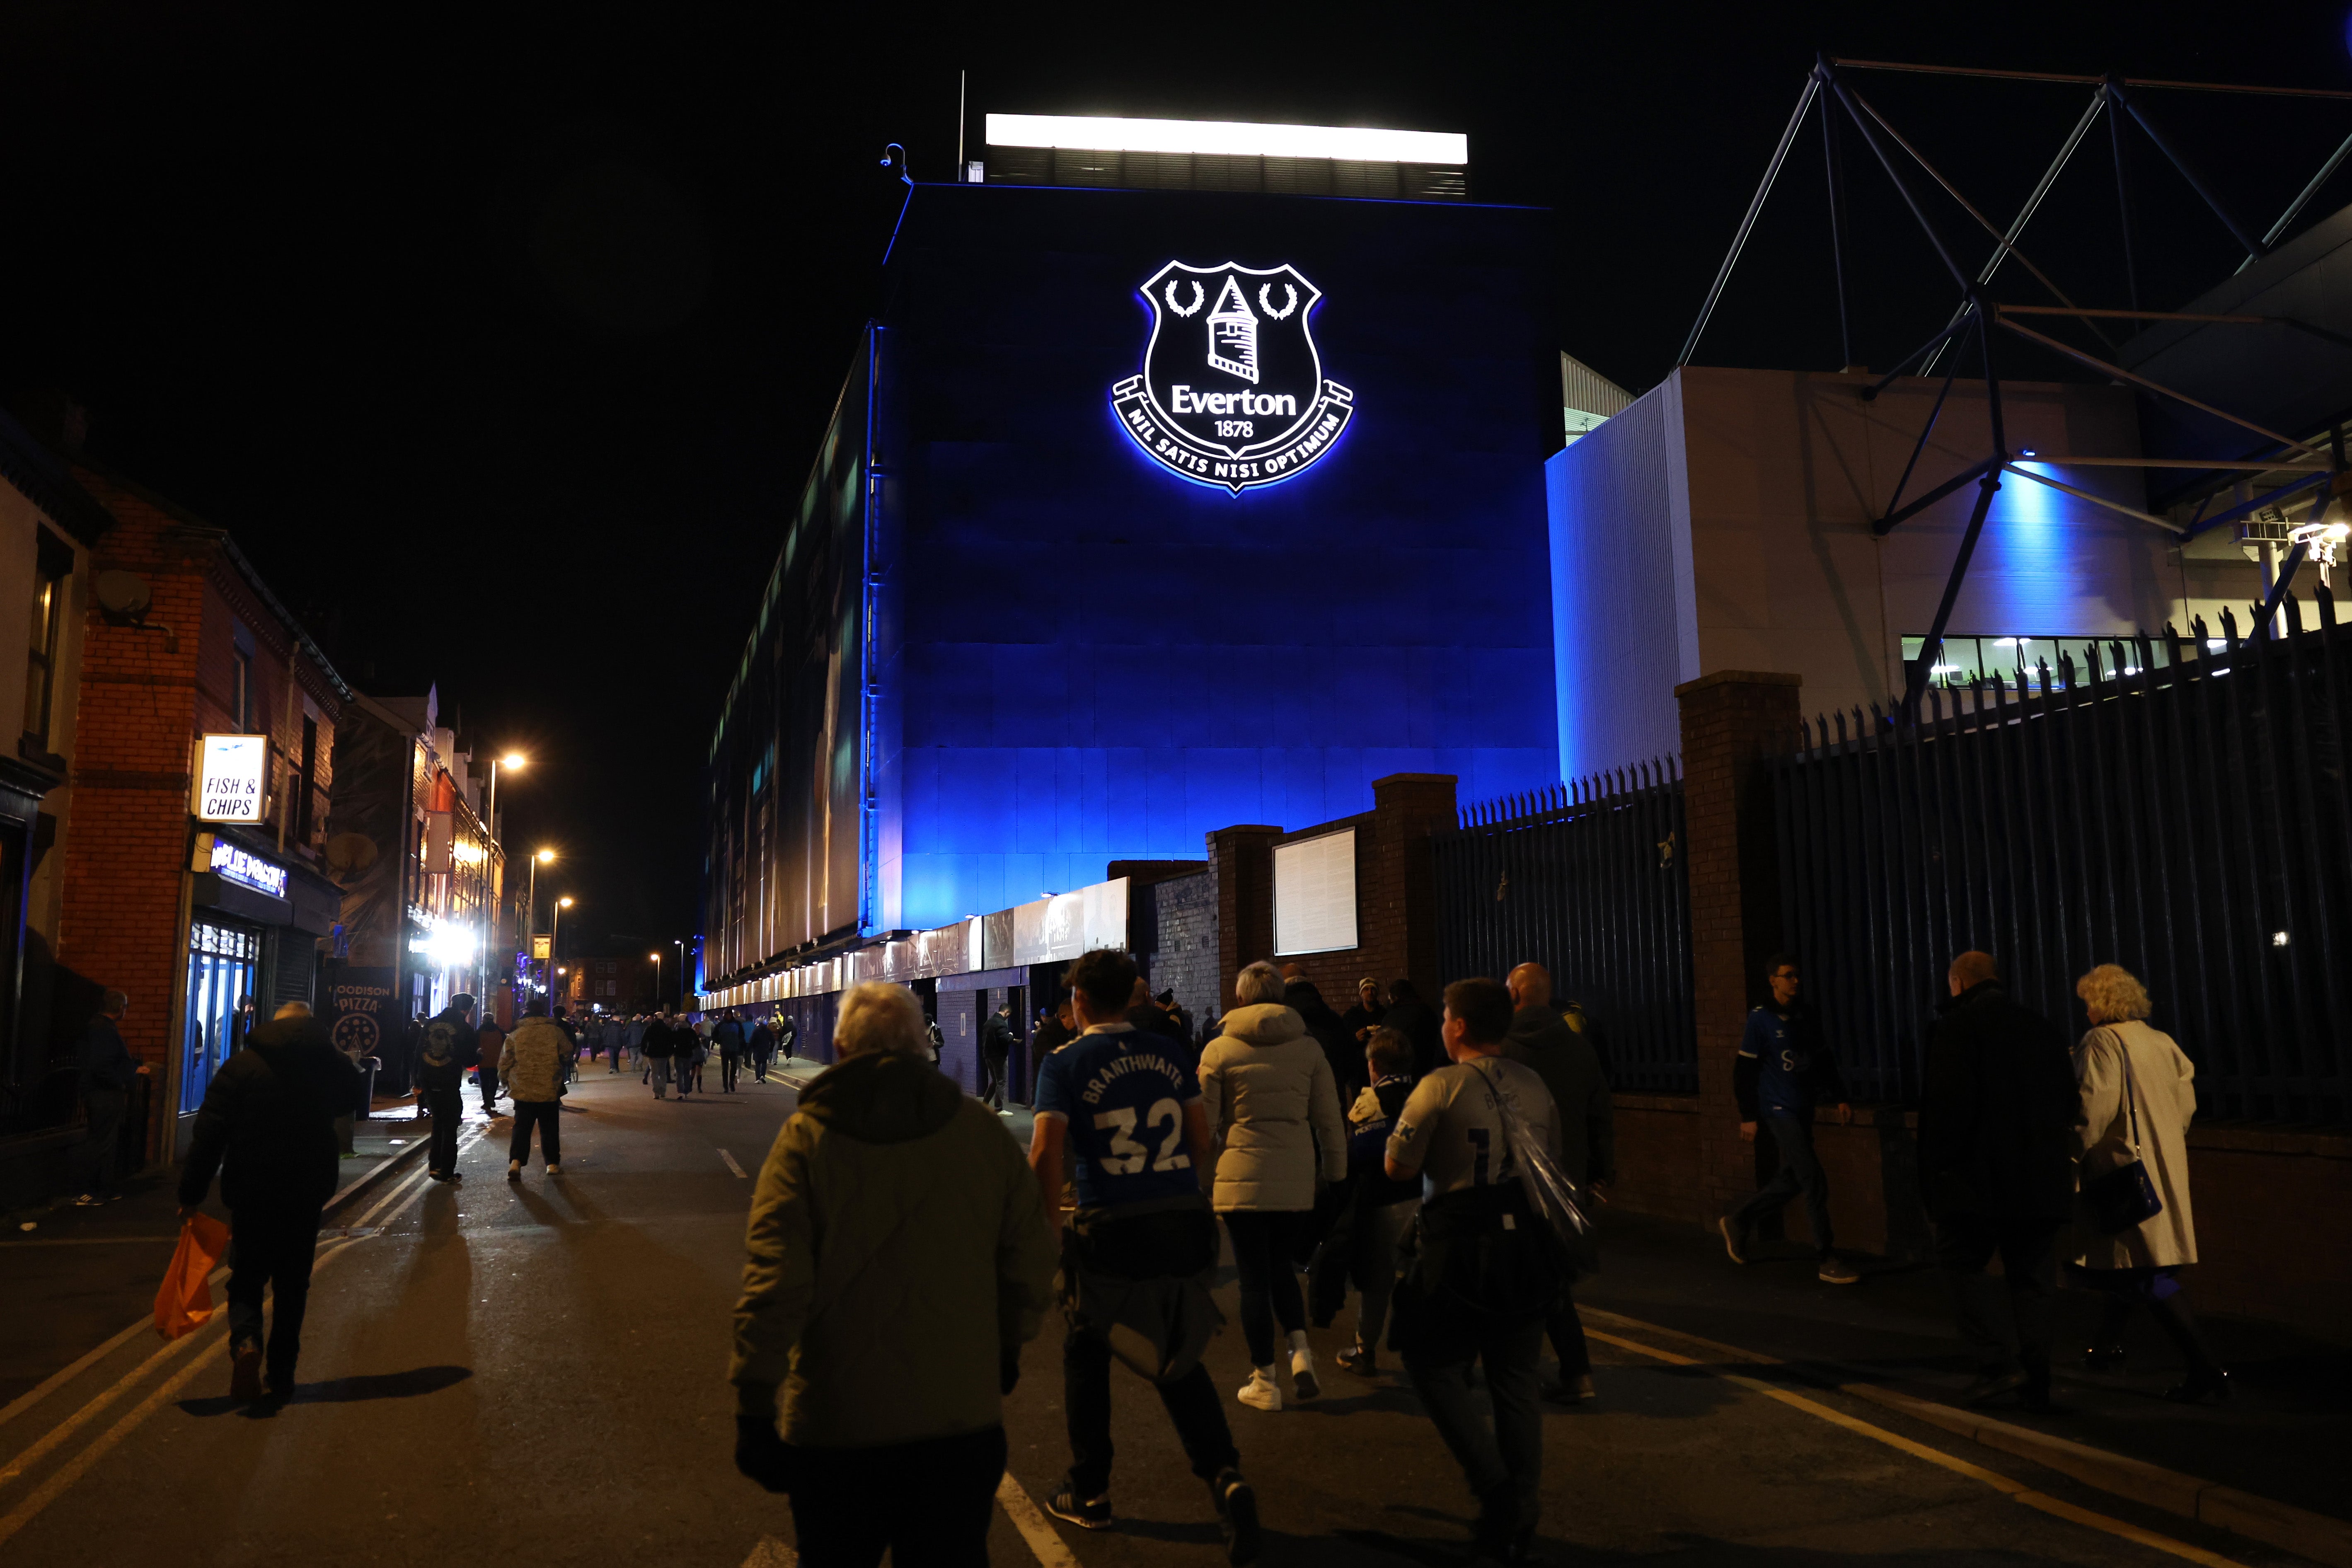 Everton will stay at Goodison until the end of the 2024-25 season